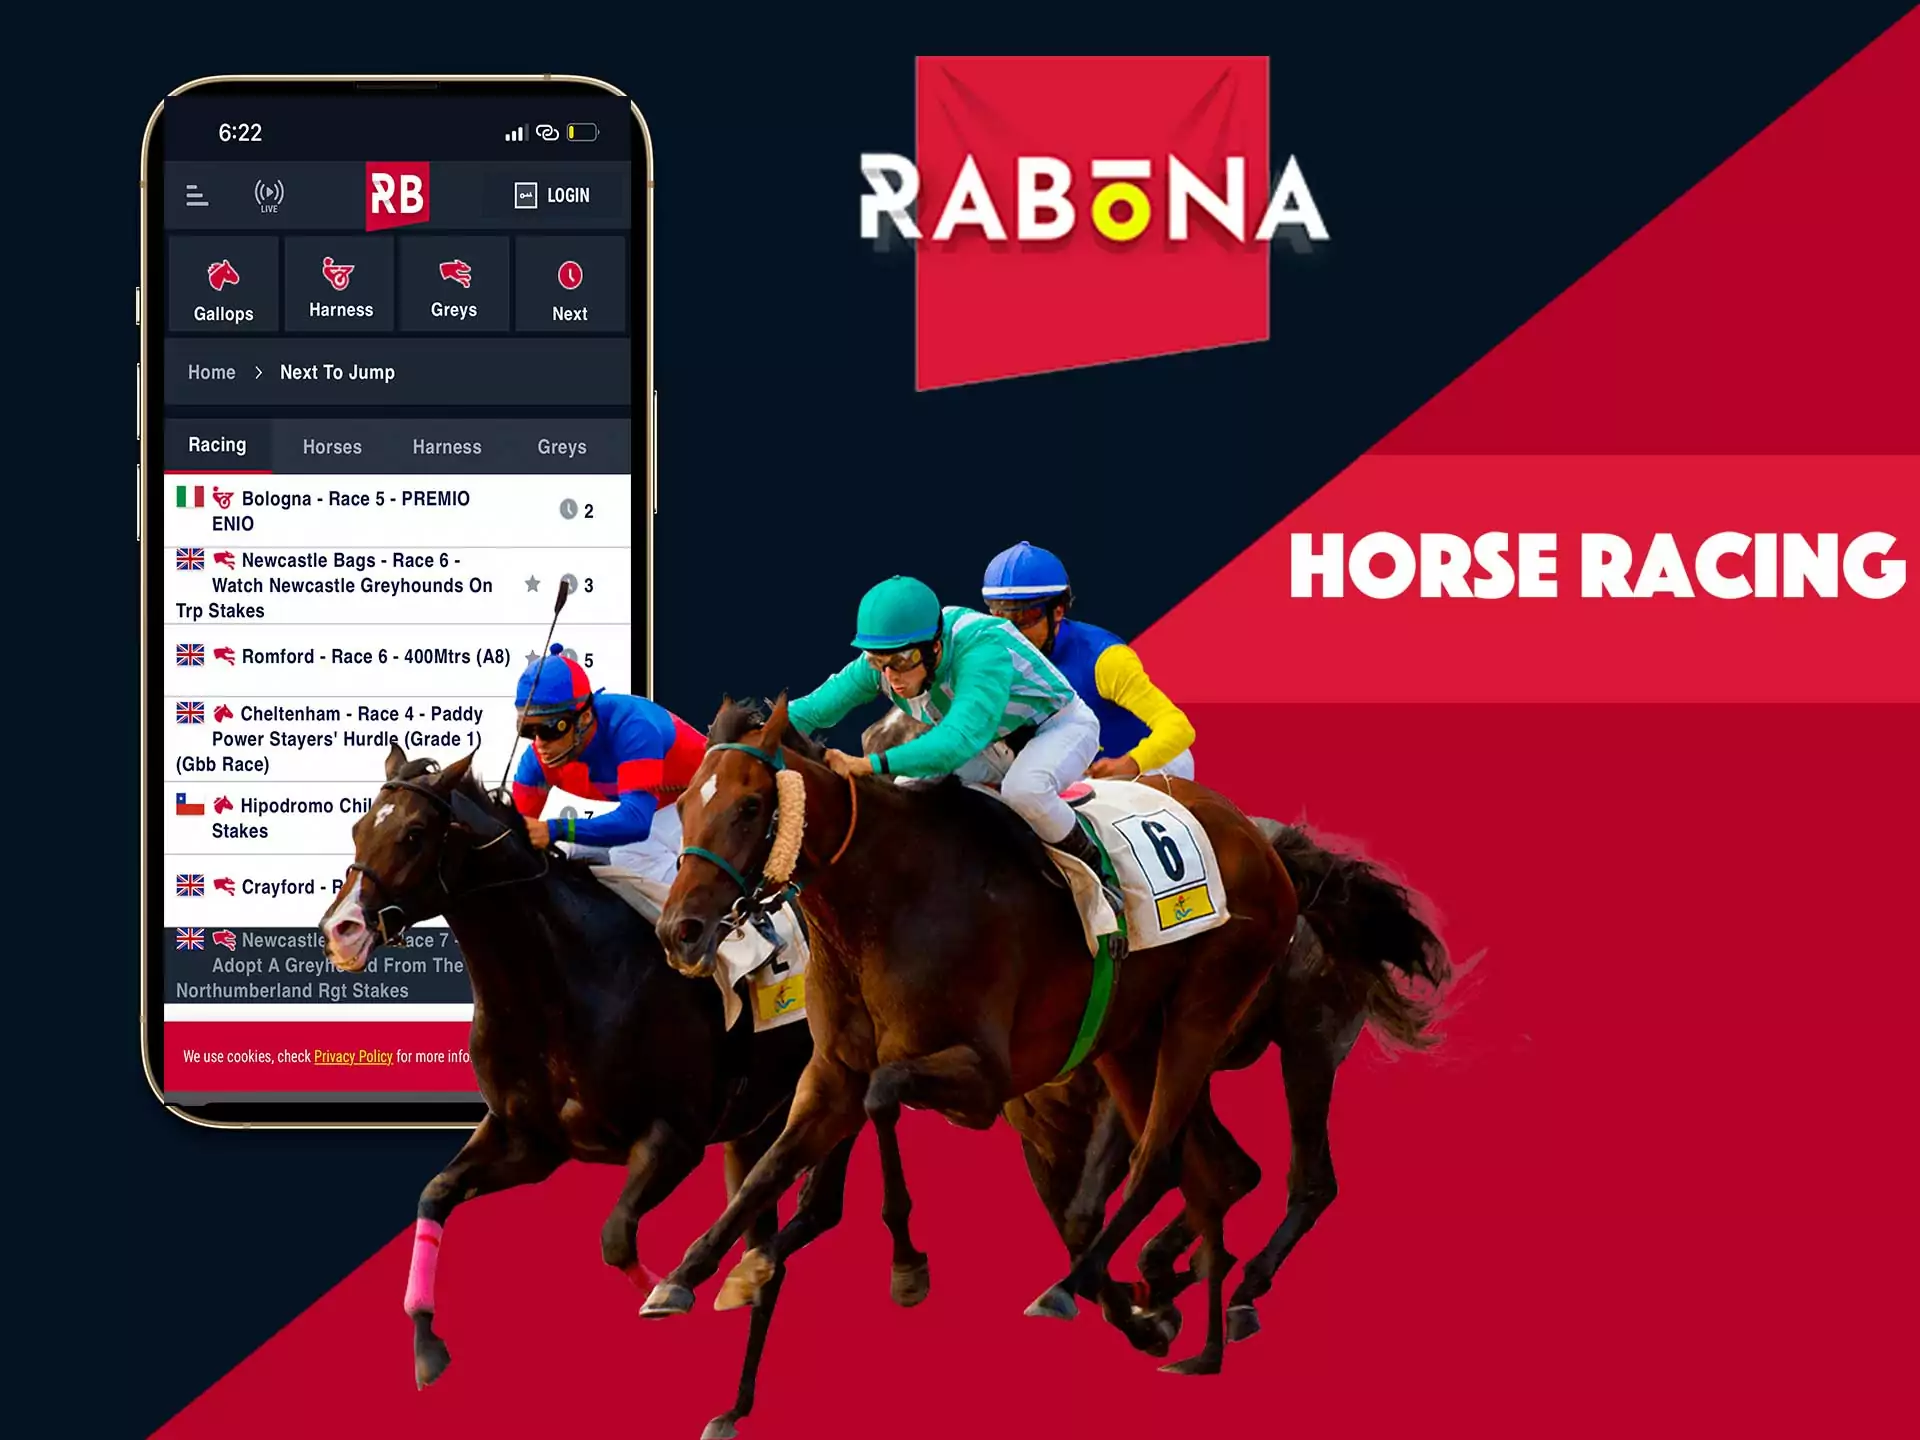 In Rabona you can bet on horse racing.